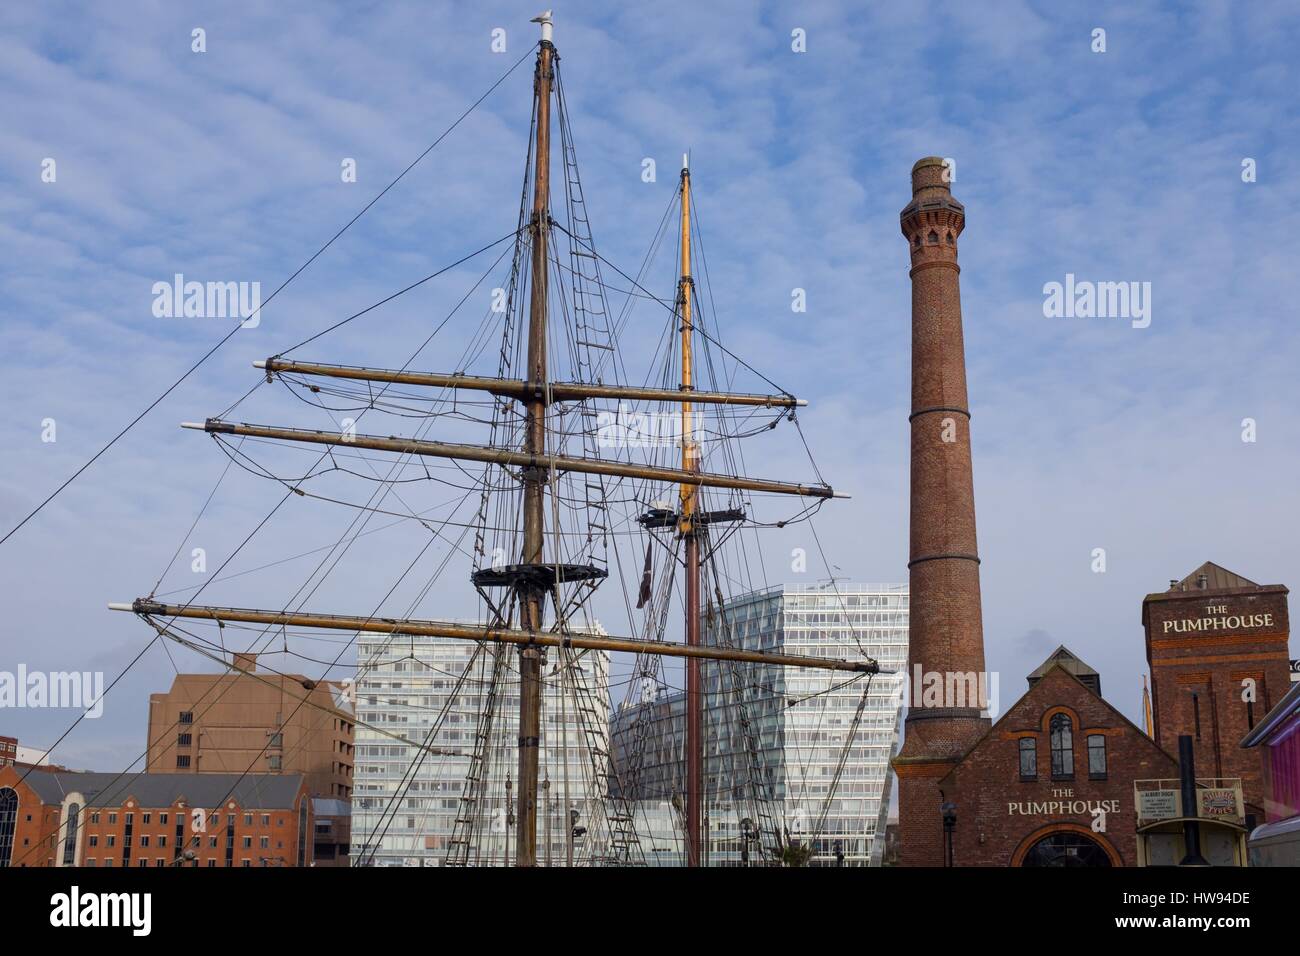 Pumphouse and tall boat mast against modern office blocks in Liverpool Stock Photo